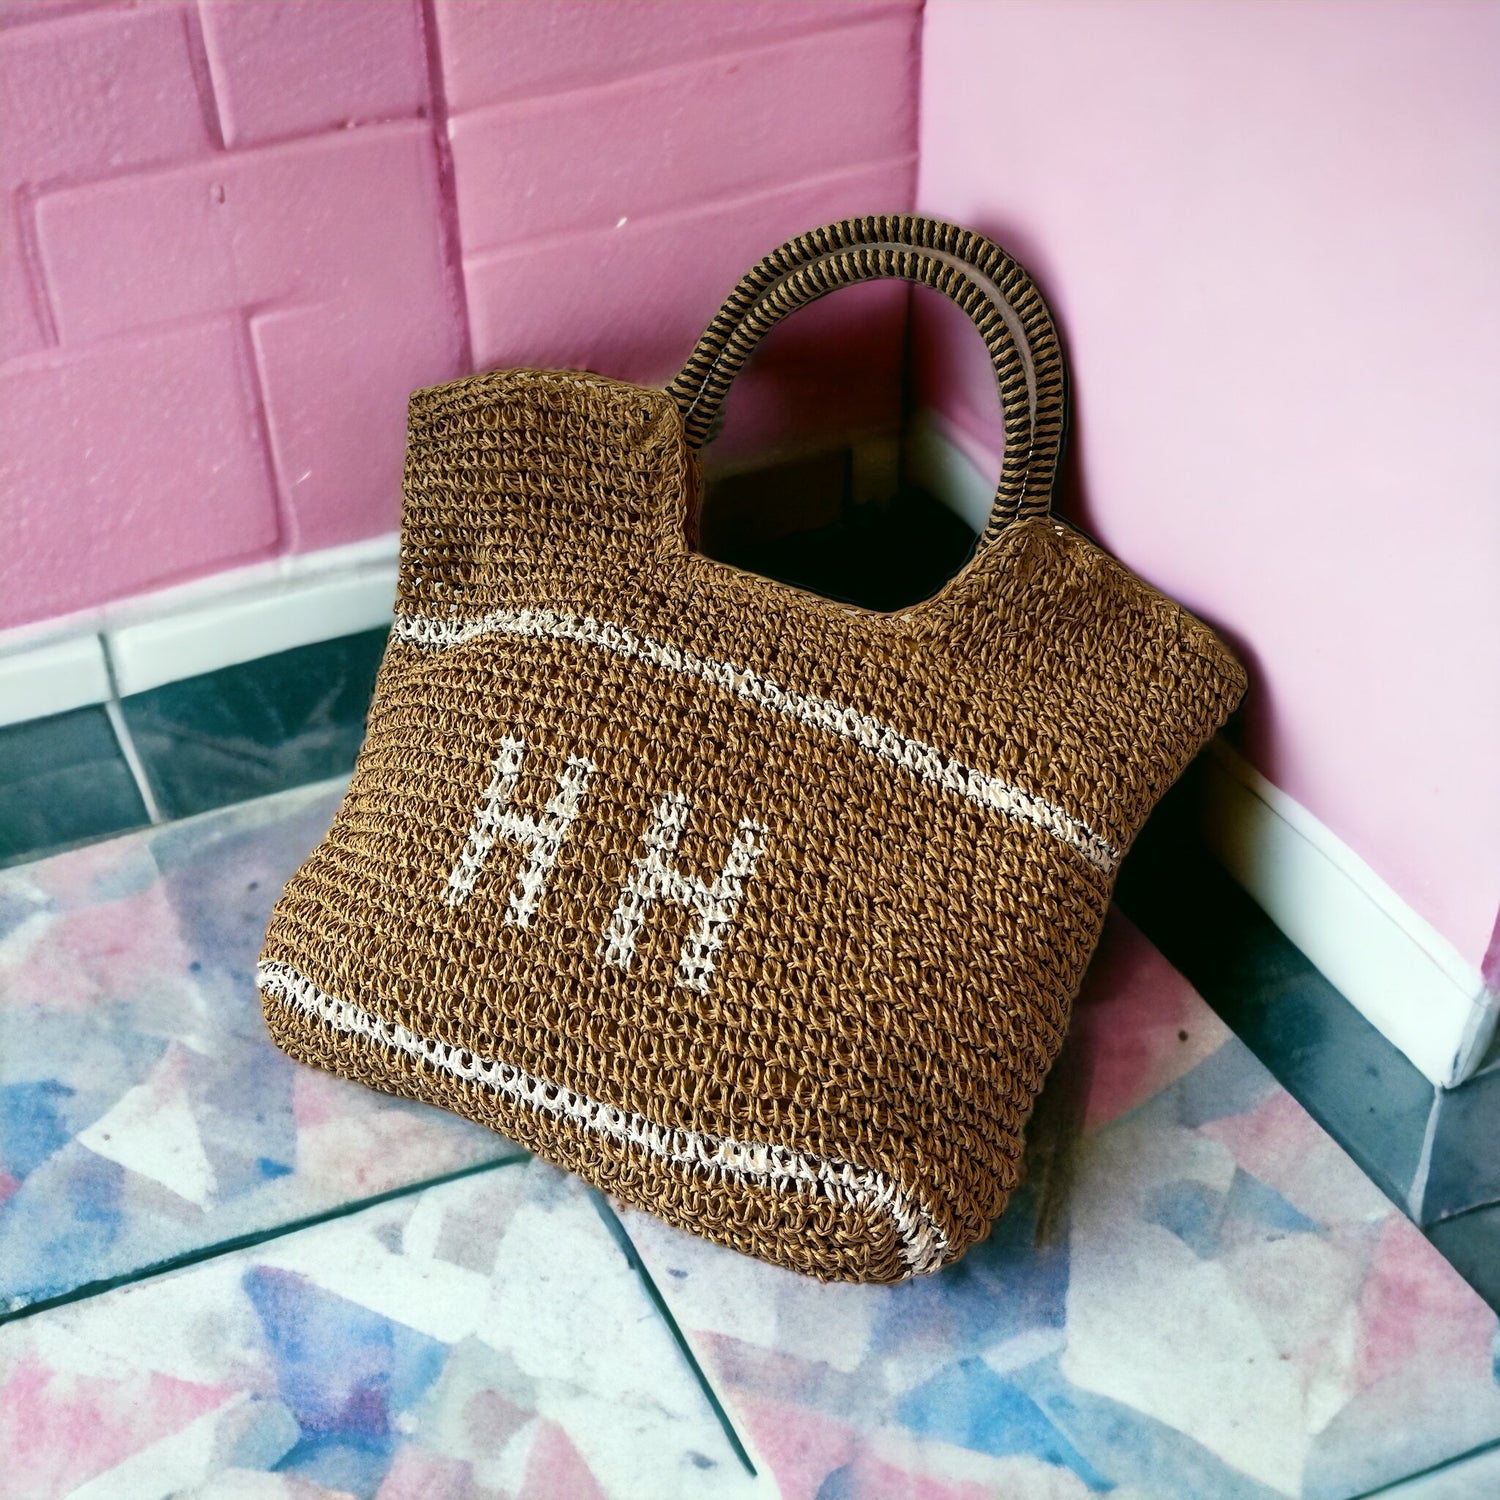 Personalised straw basket bag - small initials